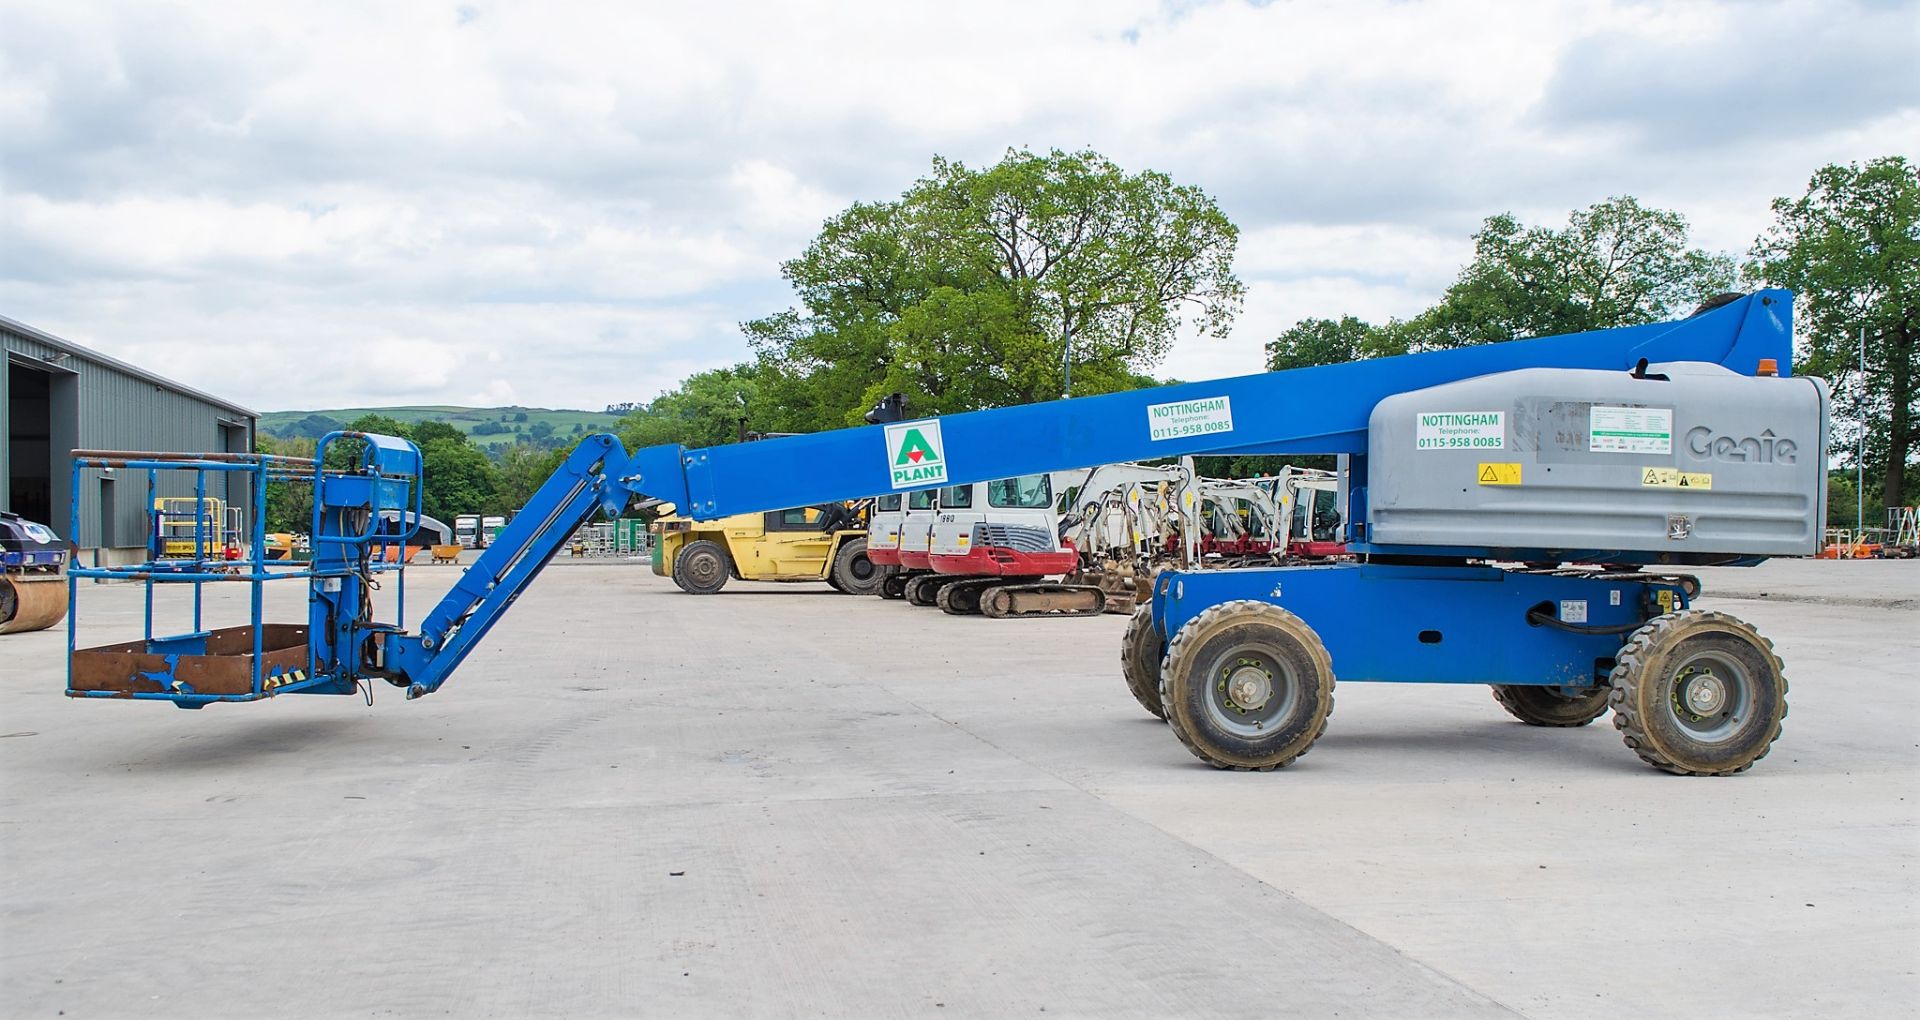 Genie S-45 diesel driven 45 ft boom lift access platform Year: 2014 S/N: 54514-18197 Recorded Hours: - Image 7 of 18